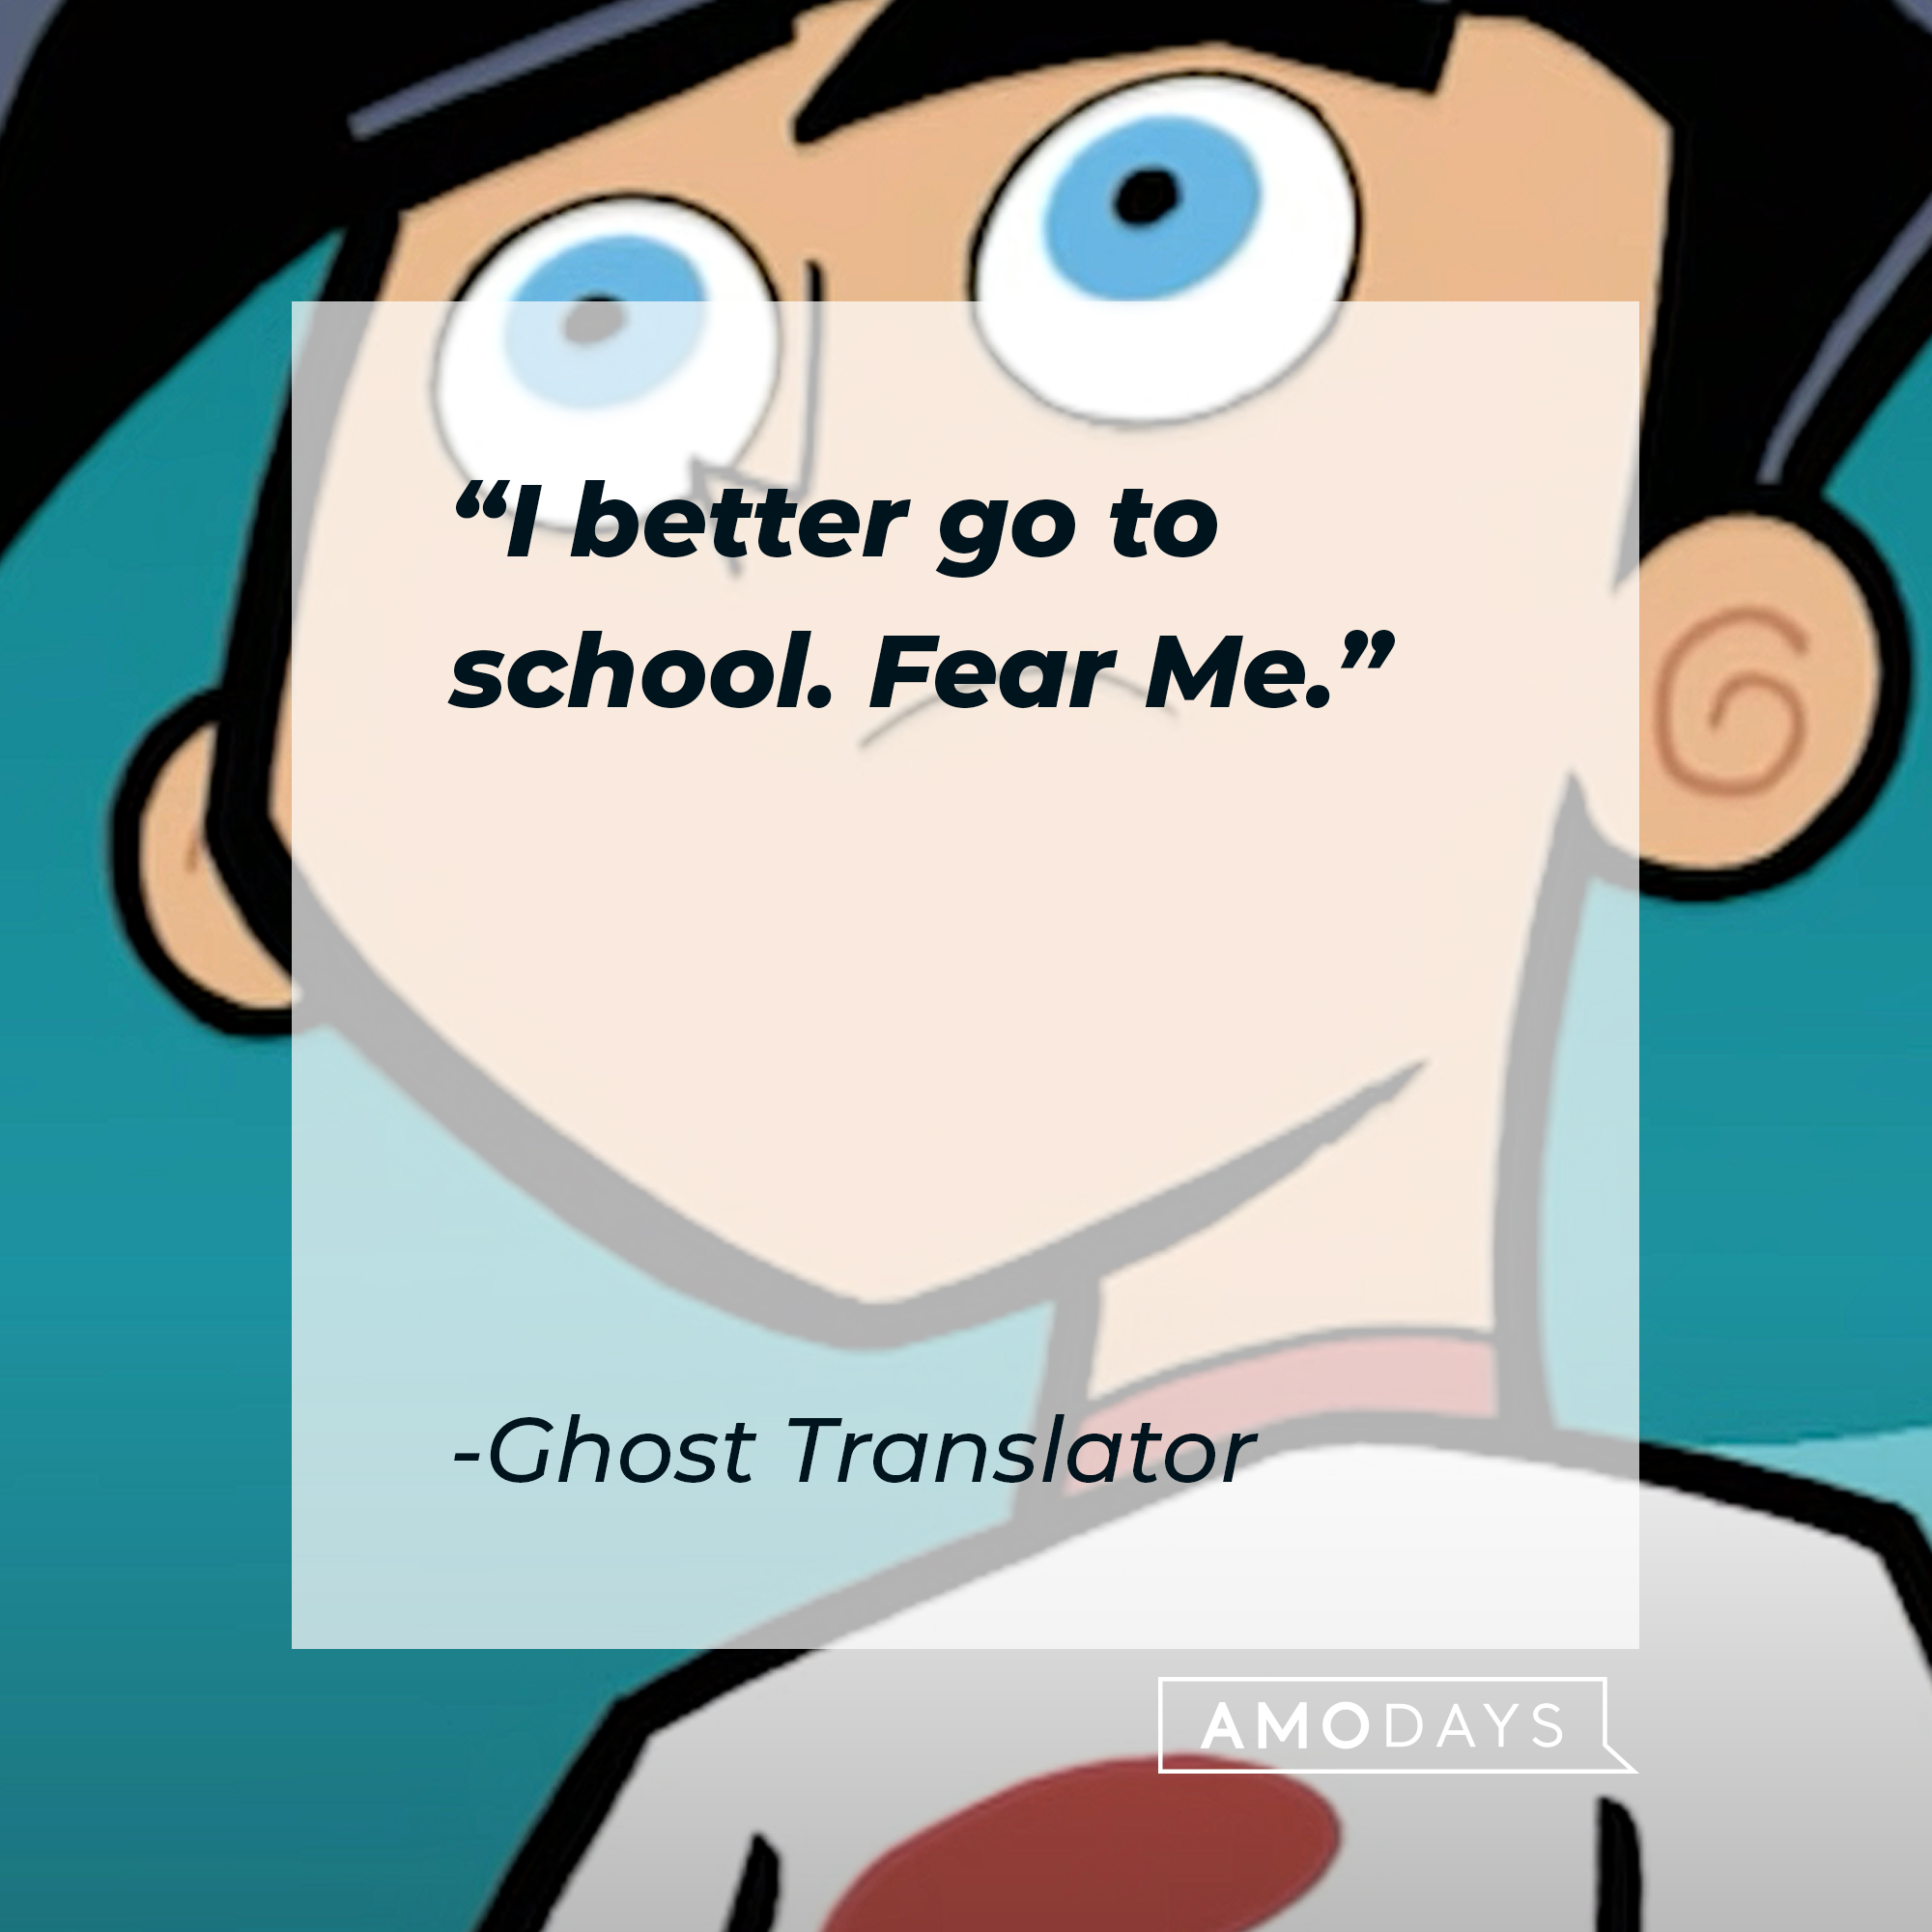 An image of Danny Fenton with Ghost Translator’s quote: “I better go to school. Fear Me.”  | Source: youtube.com/nickrewind